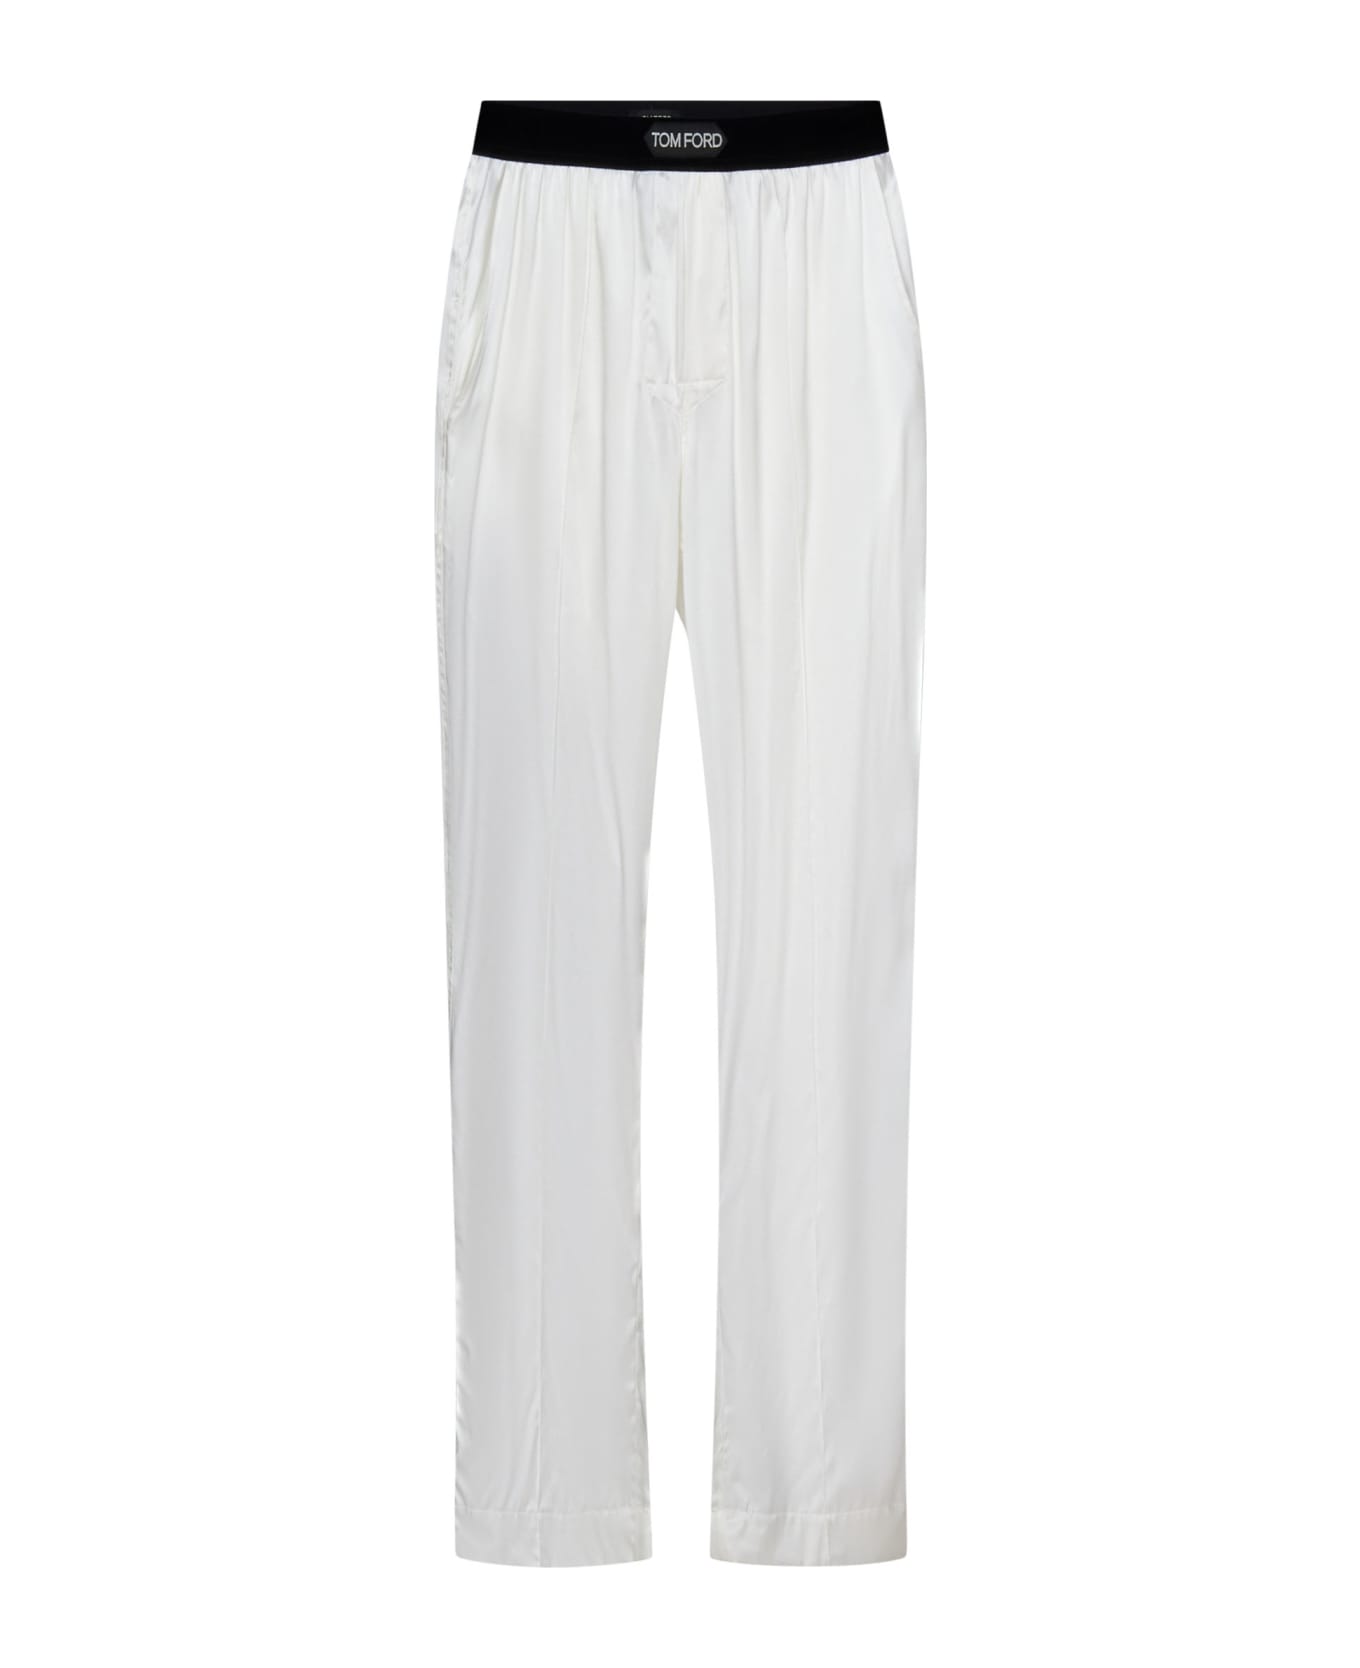 Tom Ford Trousers - Ivory